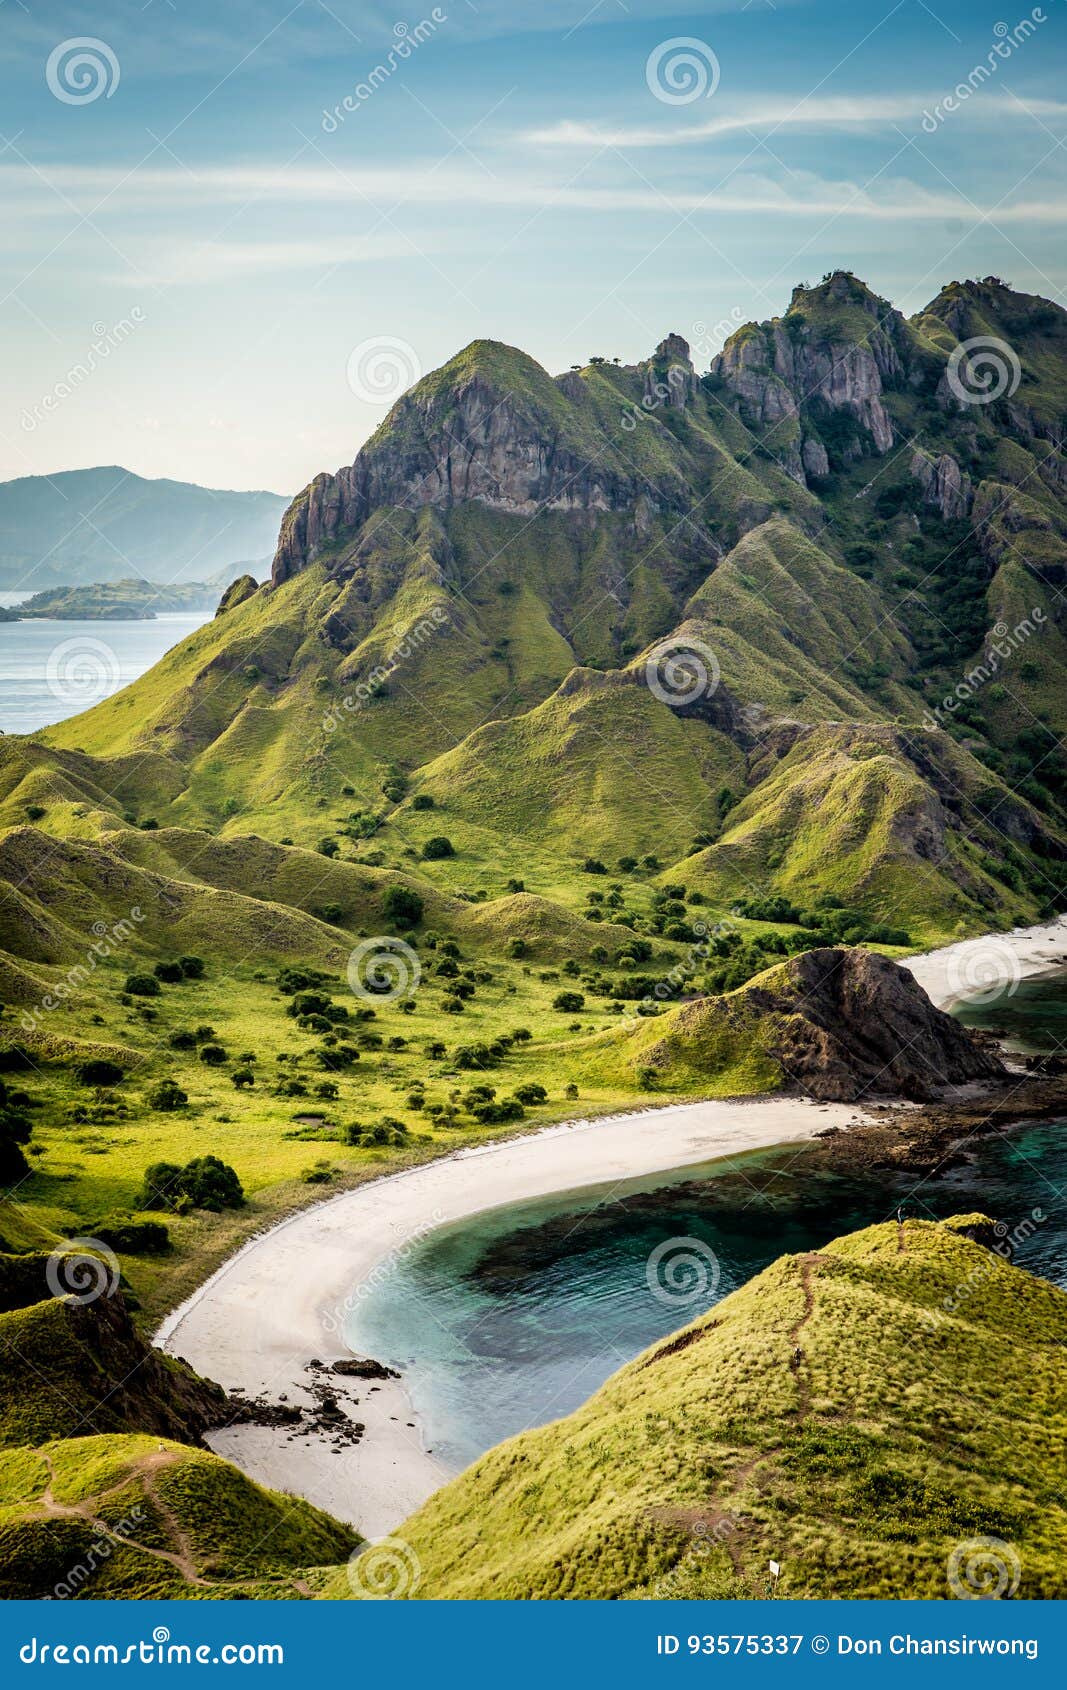 landscape view from the top of padar island in komodo islands, f